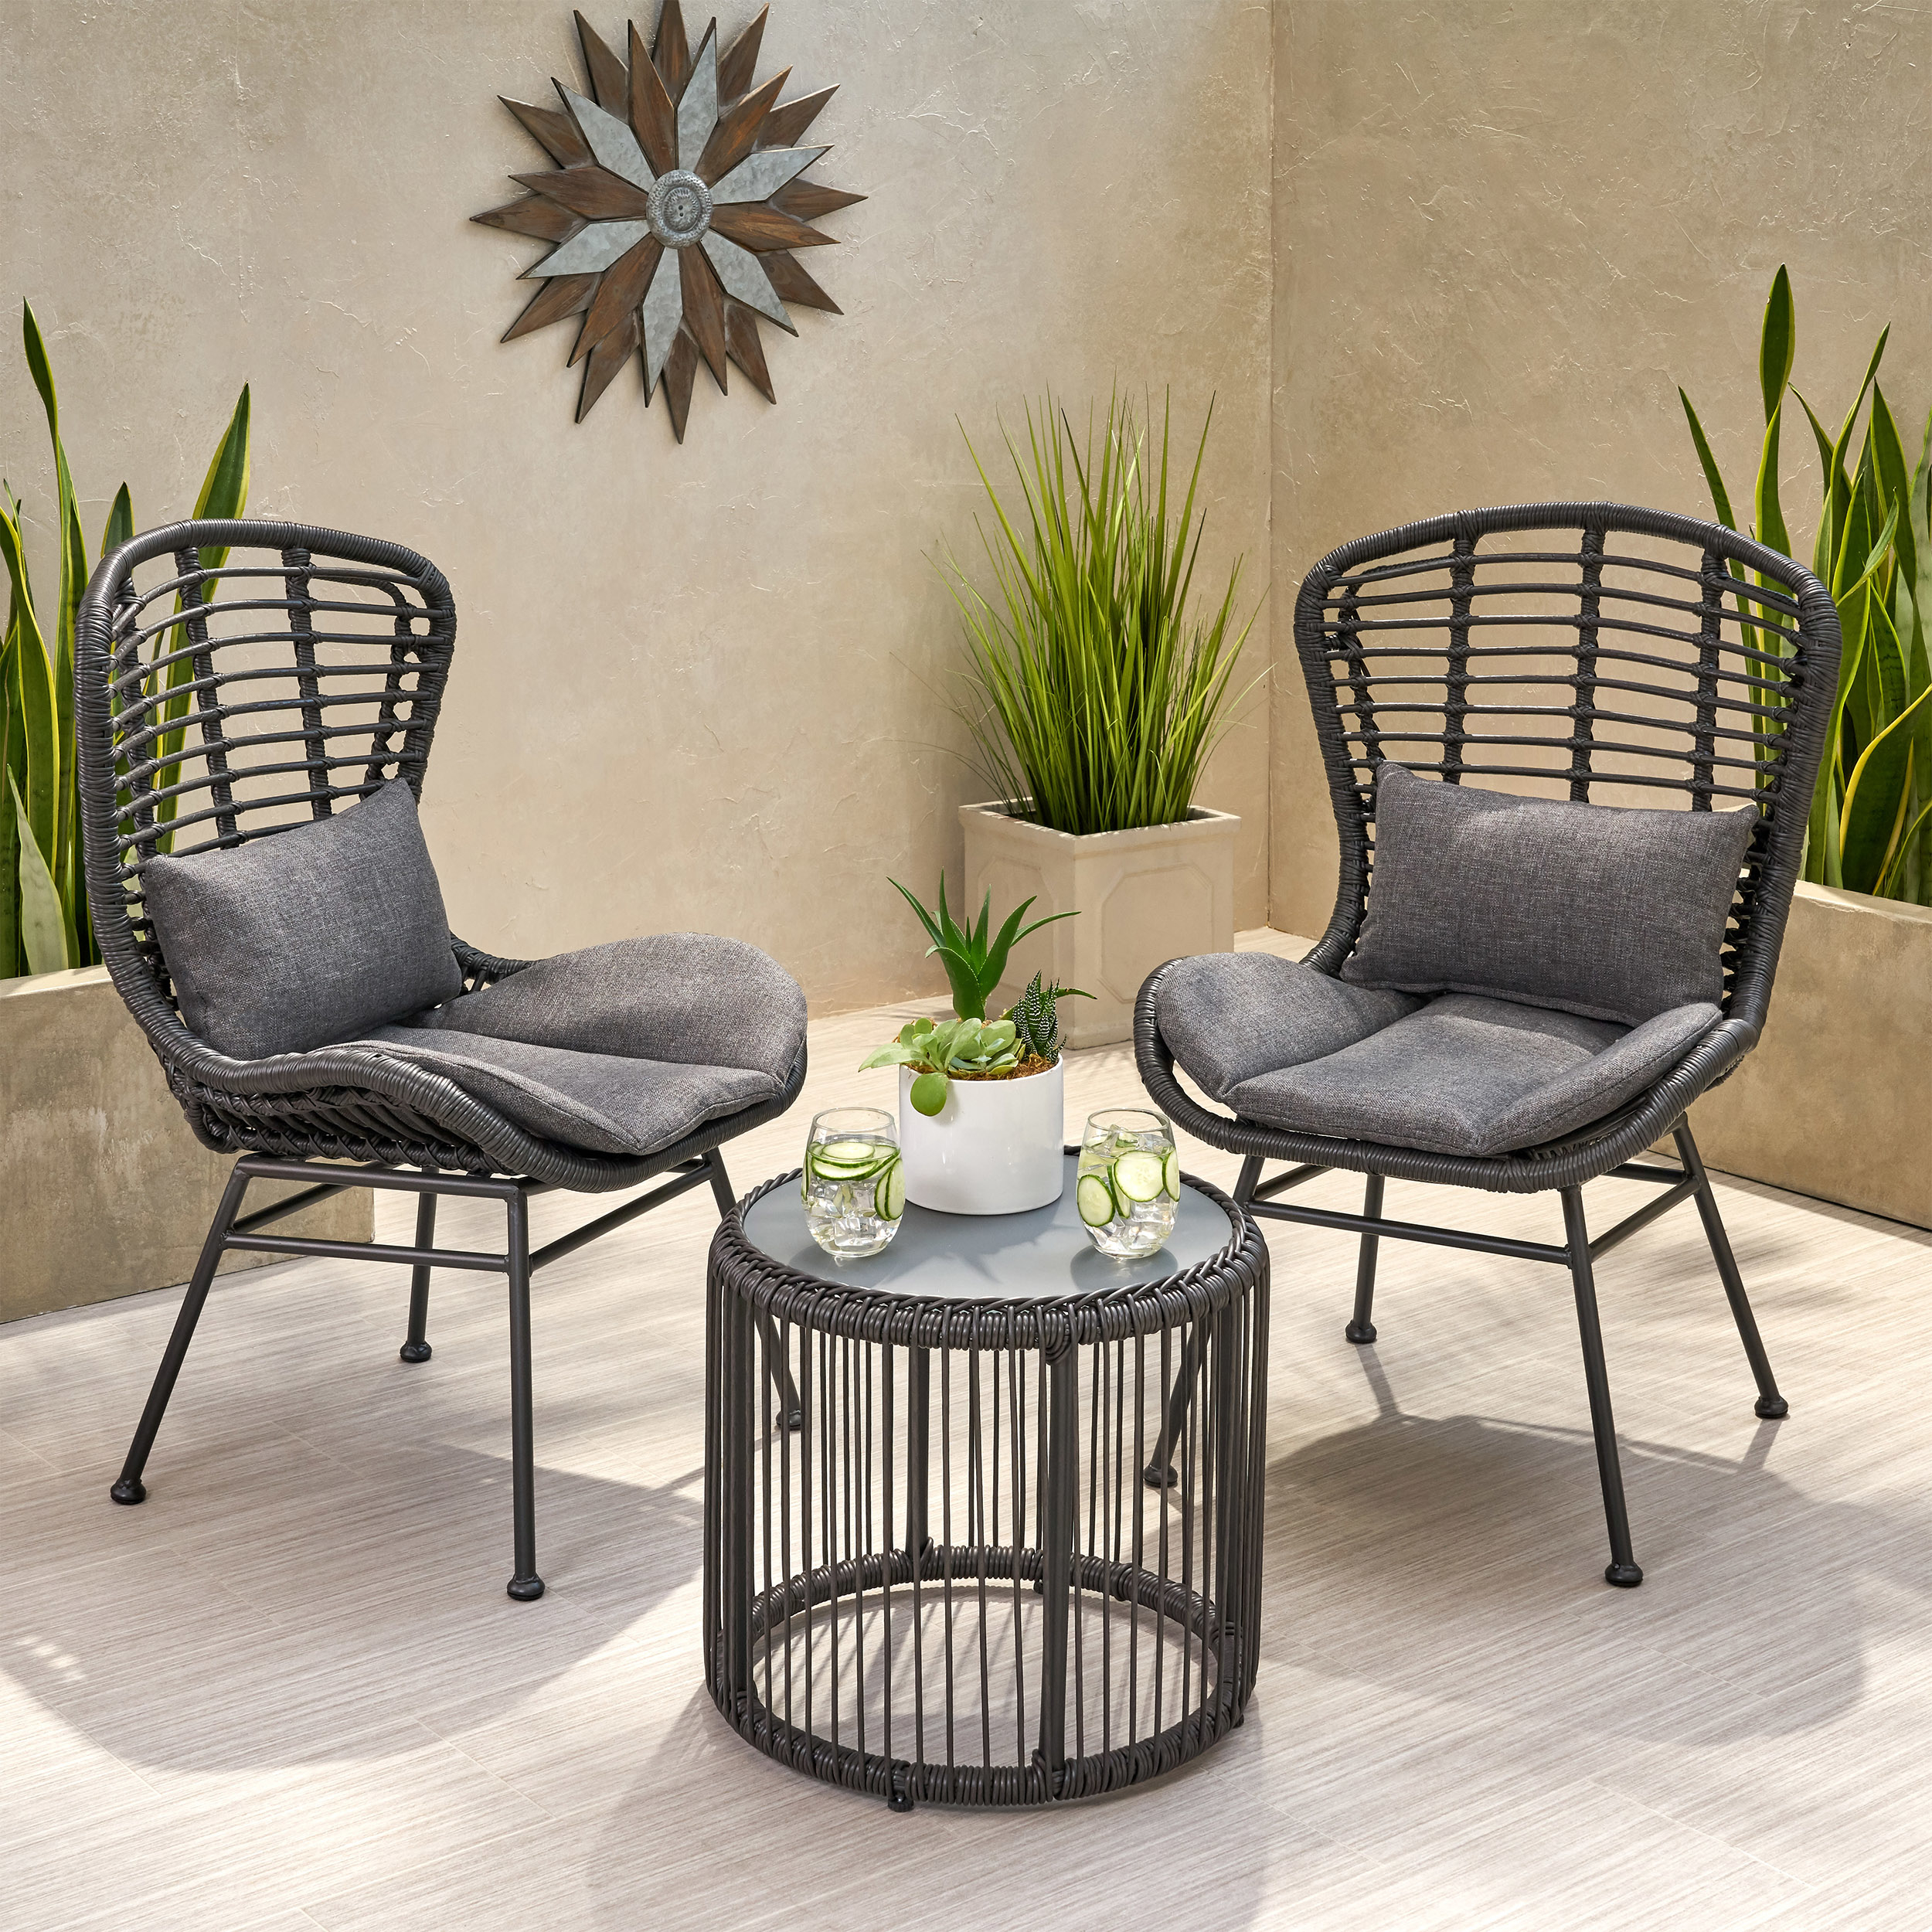 Daisy Outdoor Modern Boho 2 Seater Wicker Chat Set With Side Table - Light Brown + Black + Beige